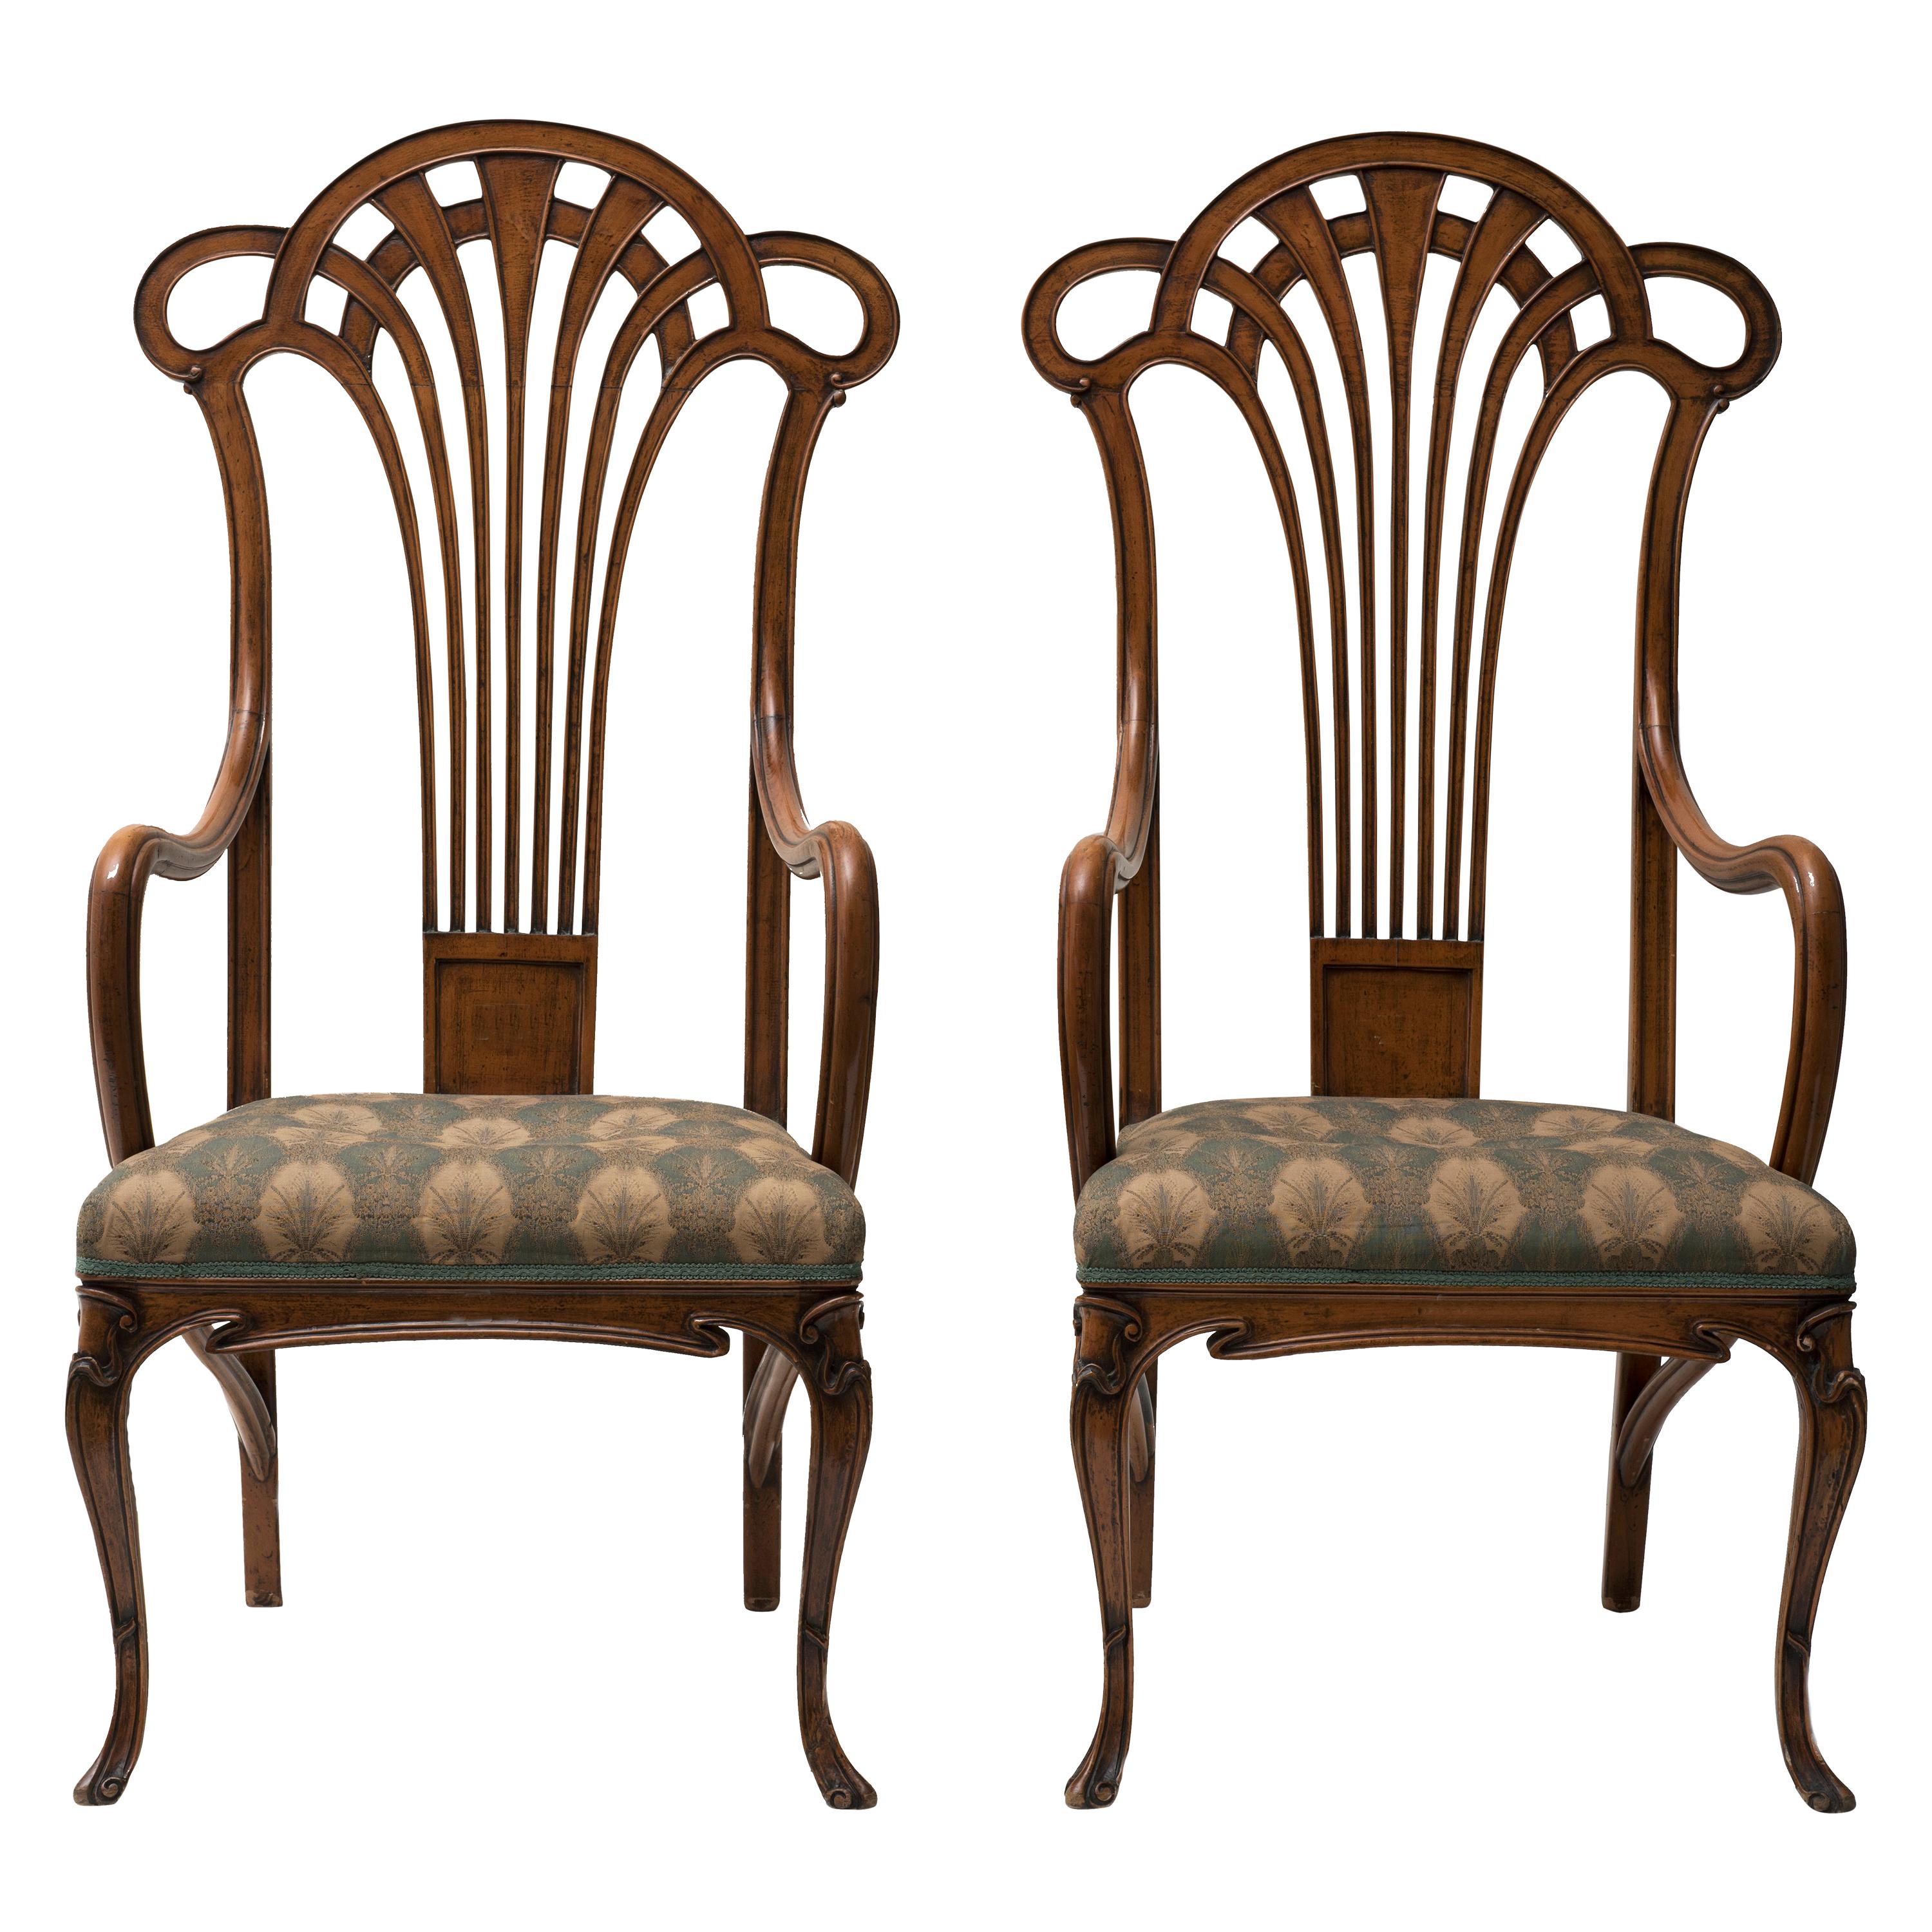 Pair of Vintage Wooden Liberty Armchairs, 19th-20th Century For Sale